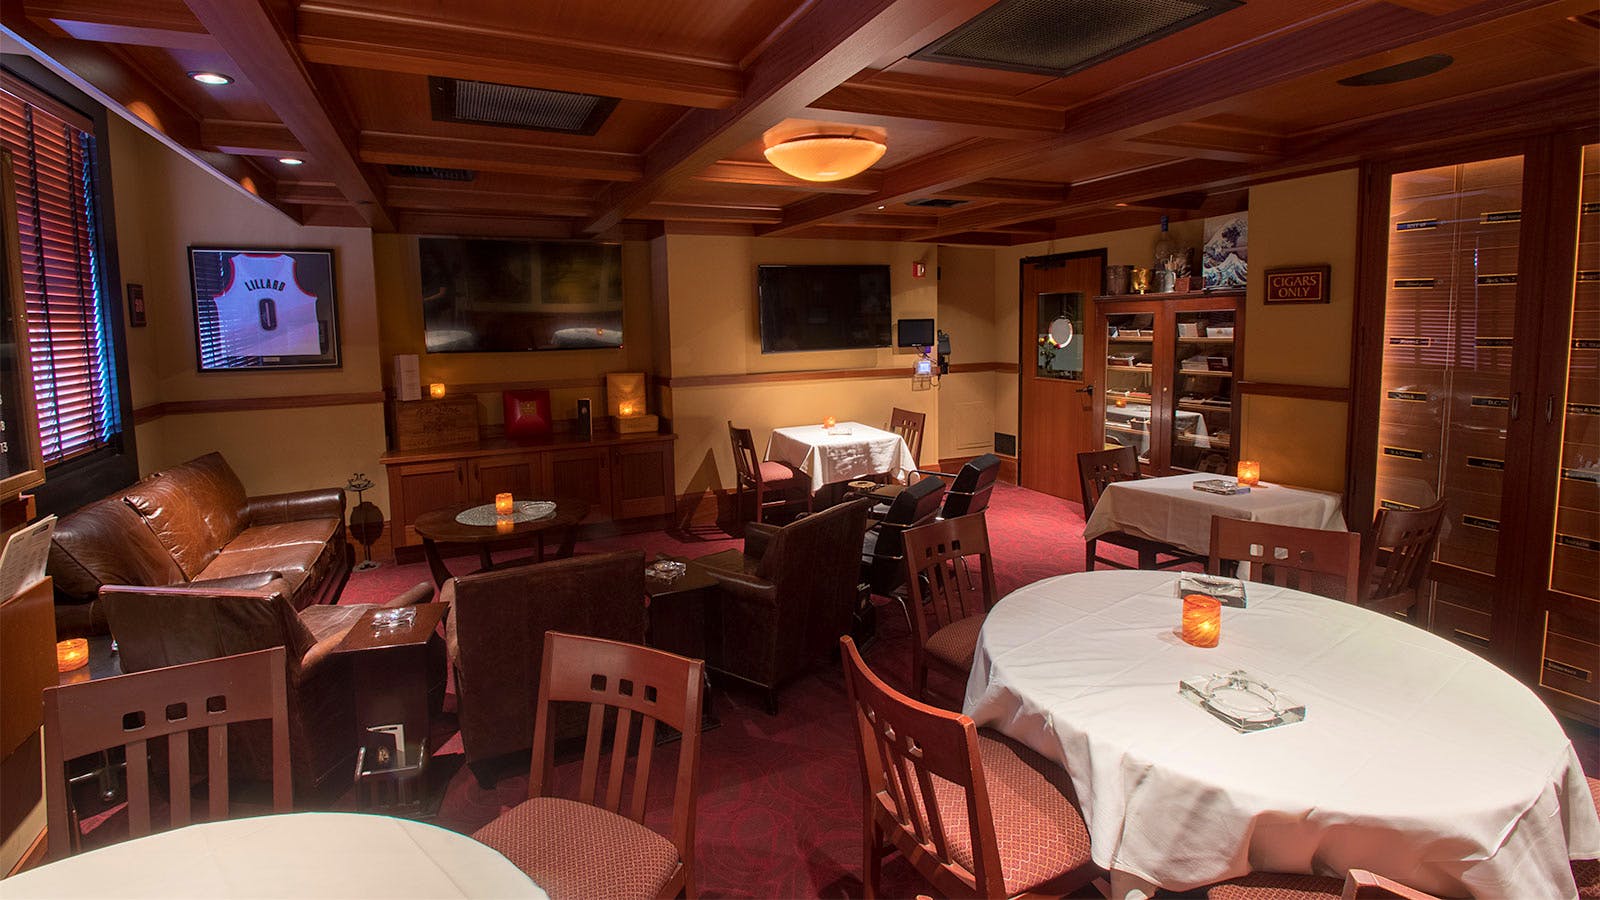 In the lounge, which seats 25, you’ll be able to enjoy a cigar and a drink and watch the game.